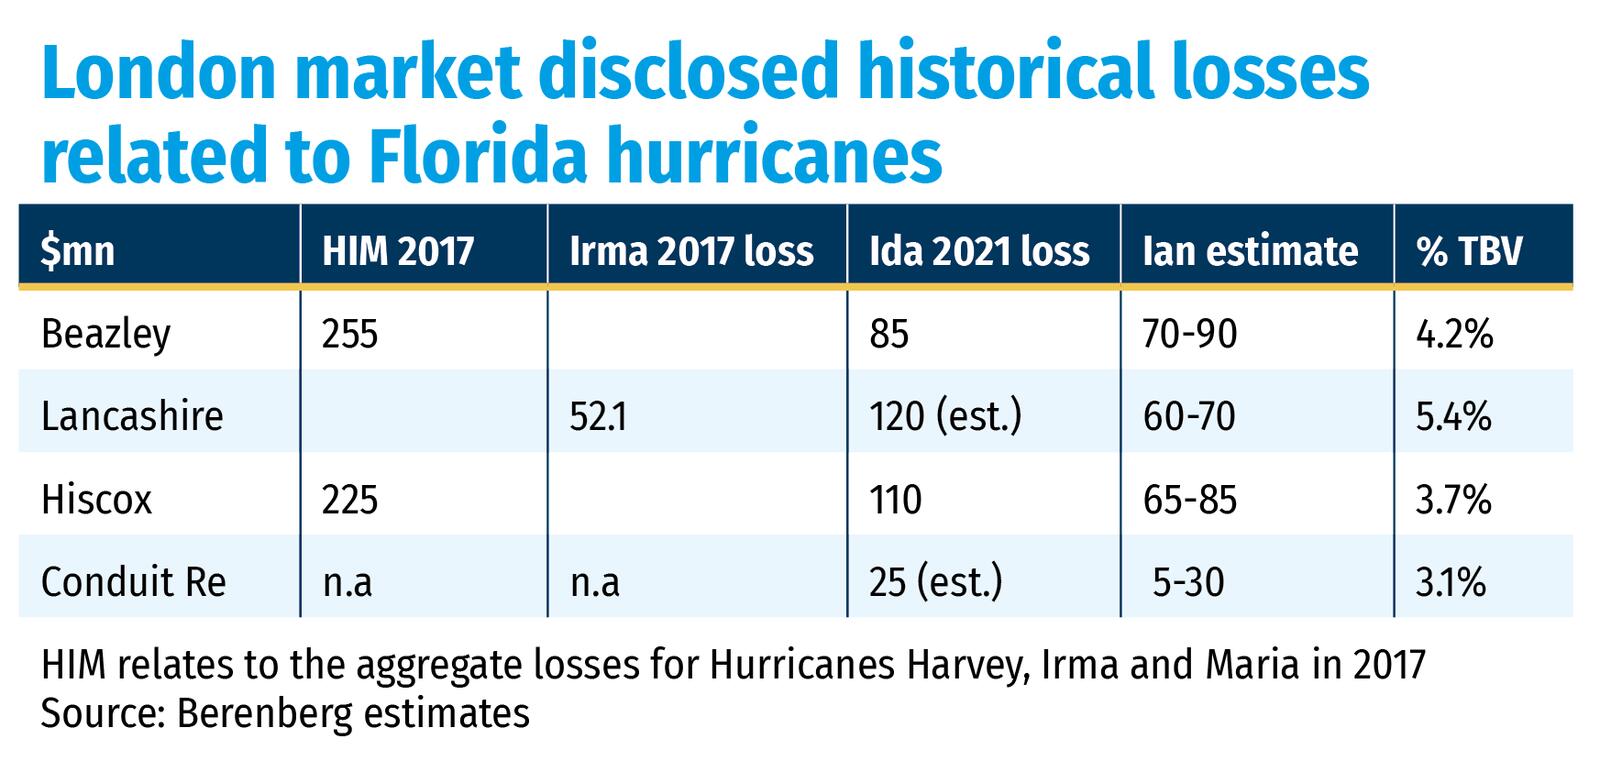 London market disclosed historical losses related to Florida hurricanes